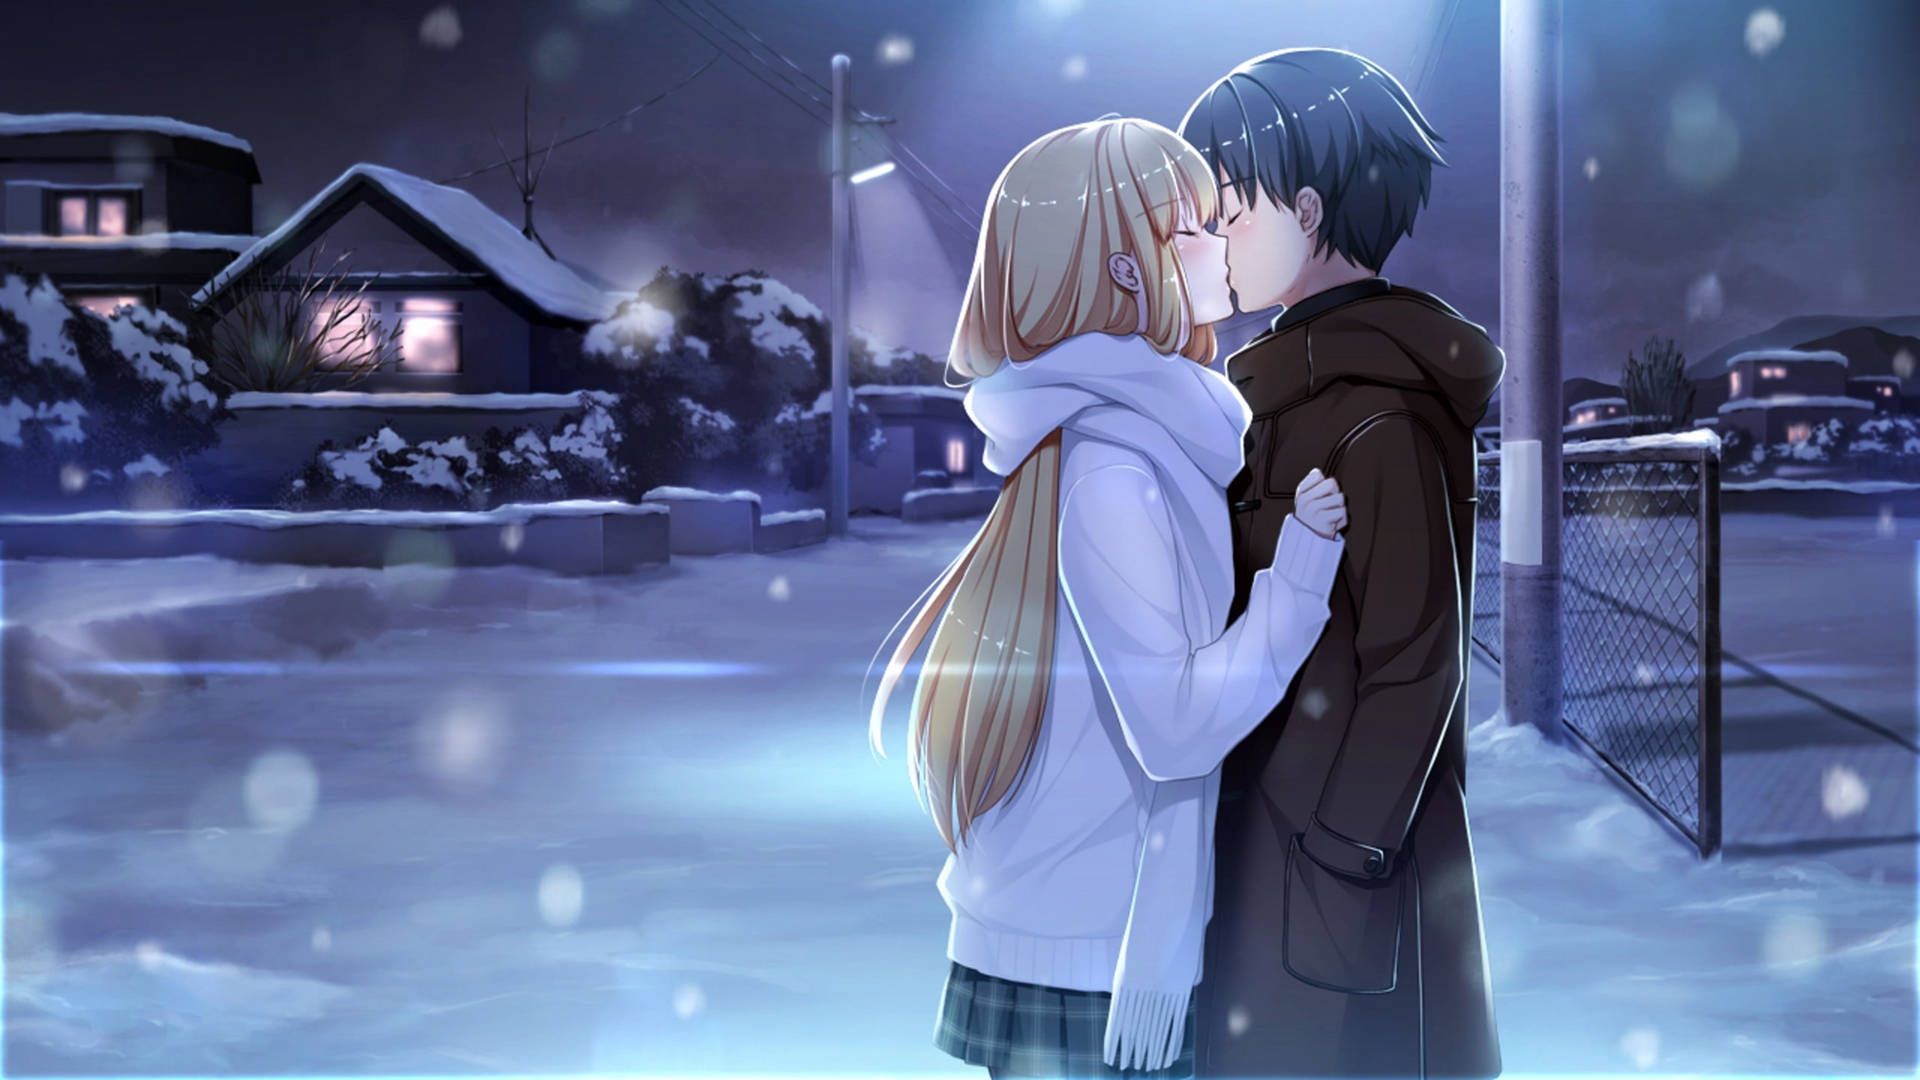 Cute Anime Couple Kissing Winter Night Background